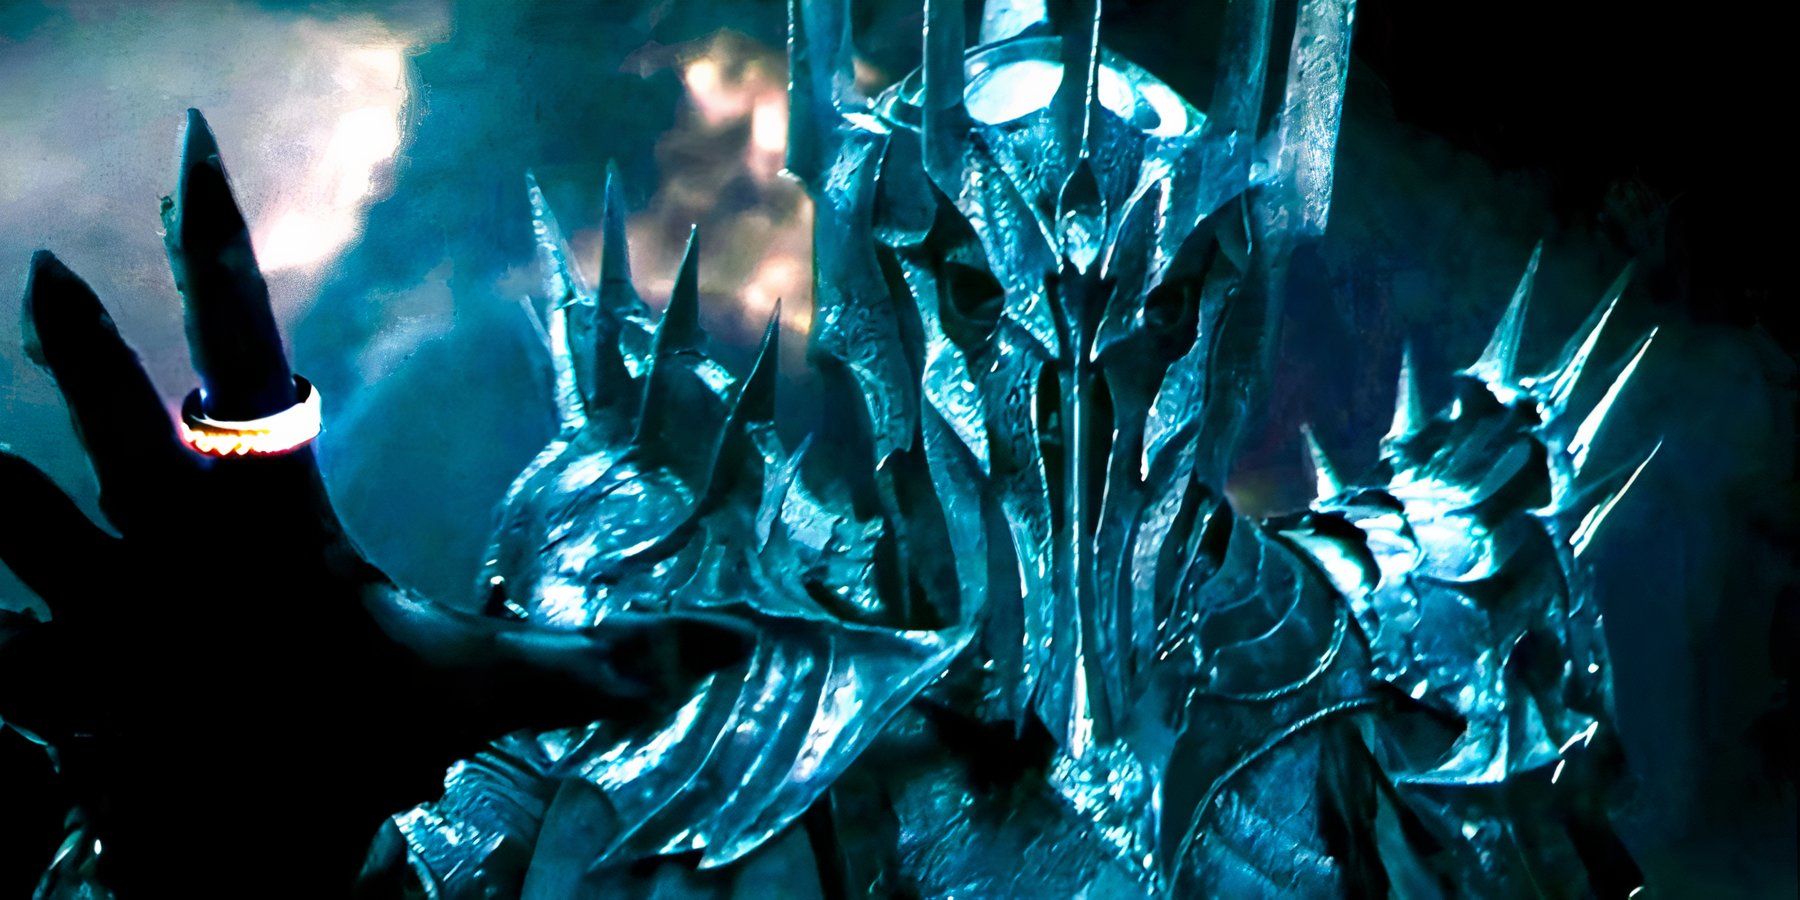 The Dark Lord Sauron, wearing the One Ring, reaches menacingly towards the camera in the prologue of The Lord of the Rings: The Fellowship of the Ring.